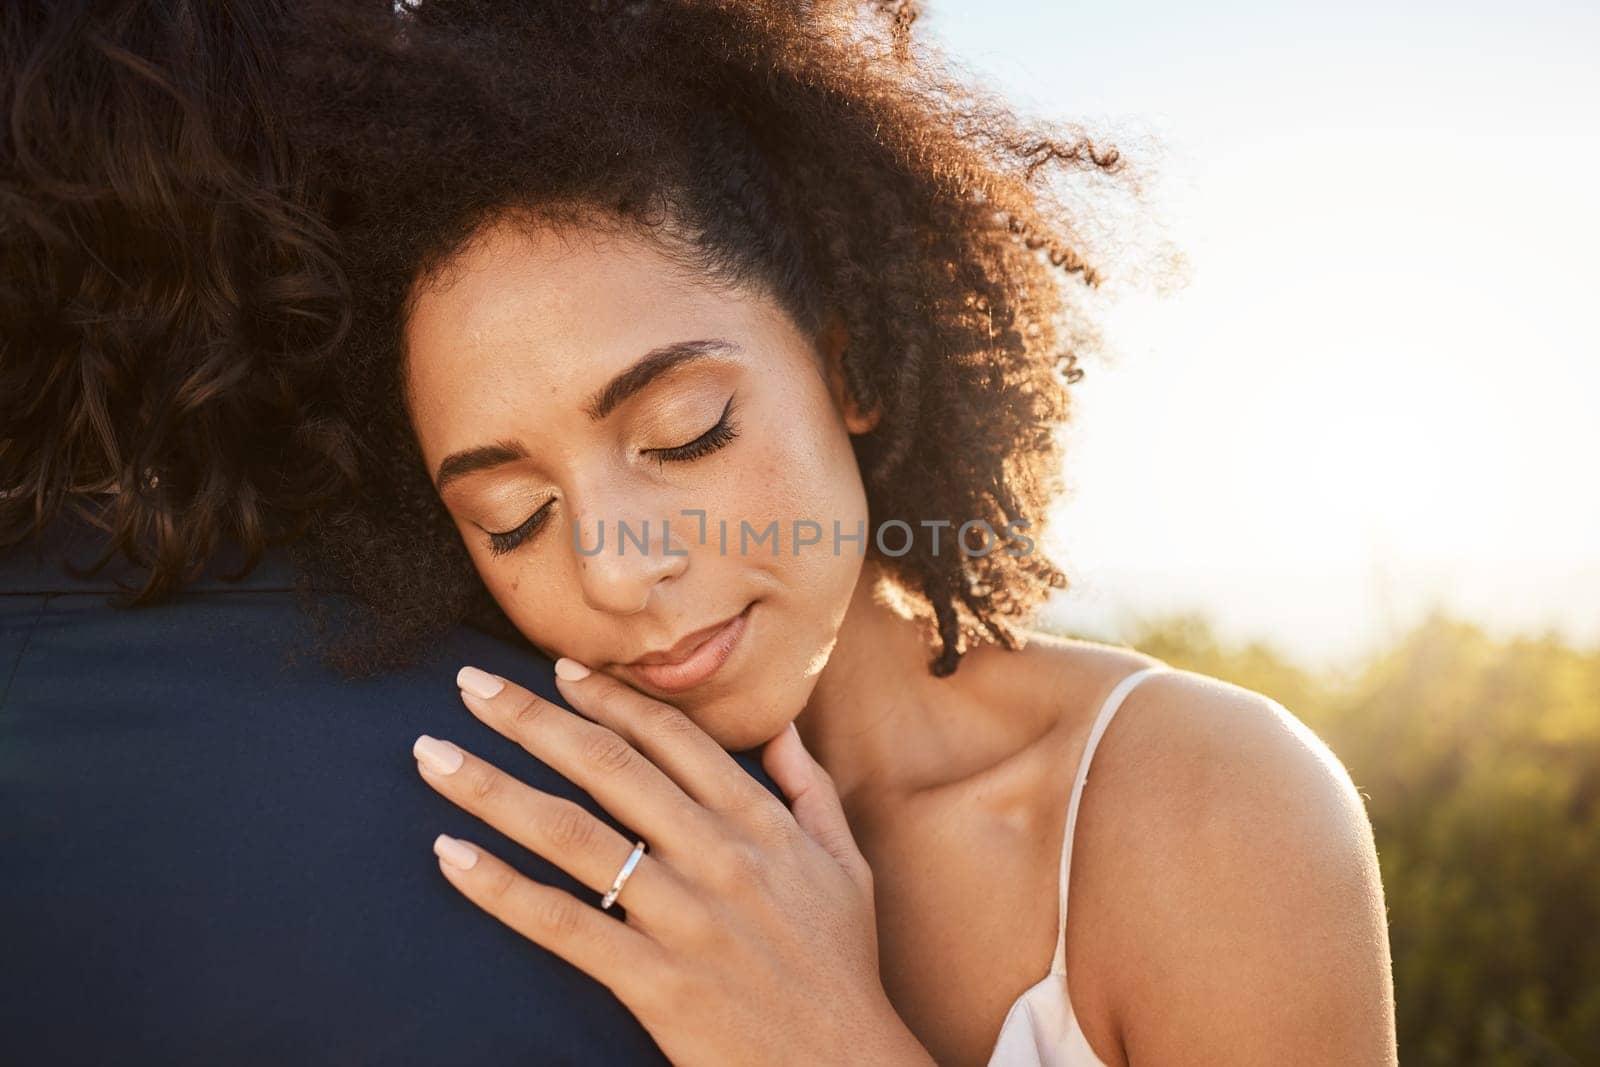 Wedding, bride and hug at sunset with embrace together for care, love and support in married life. Marriage of happy black woman hugging man in romance for commitment embracing relationship in nature.